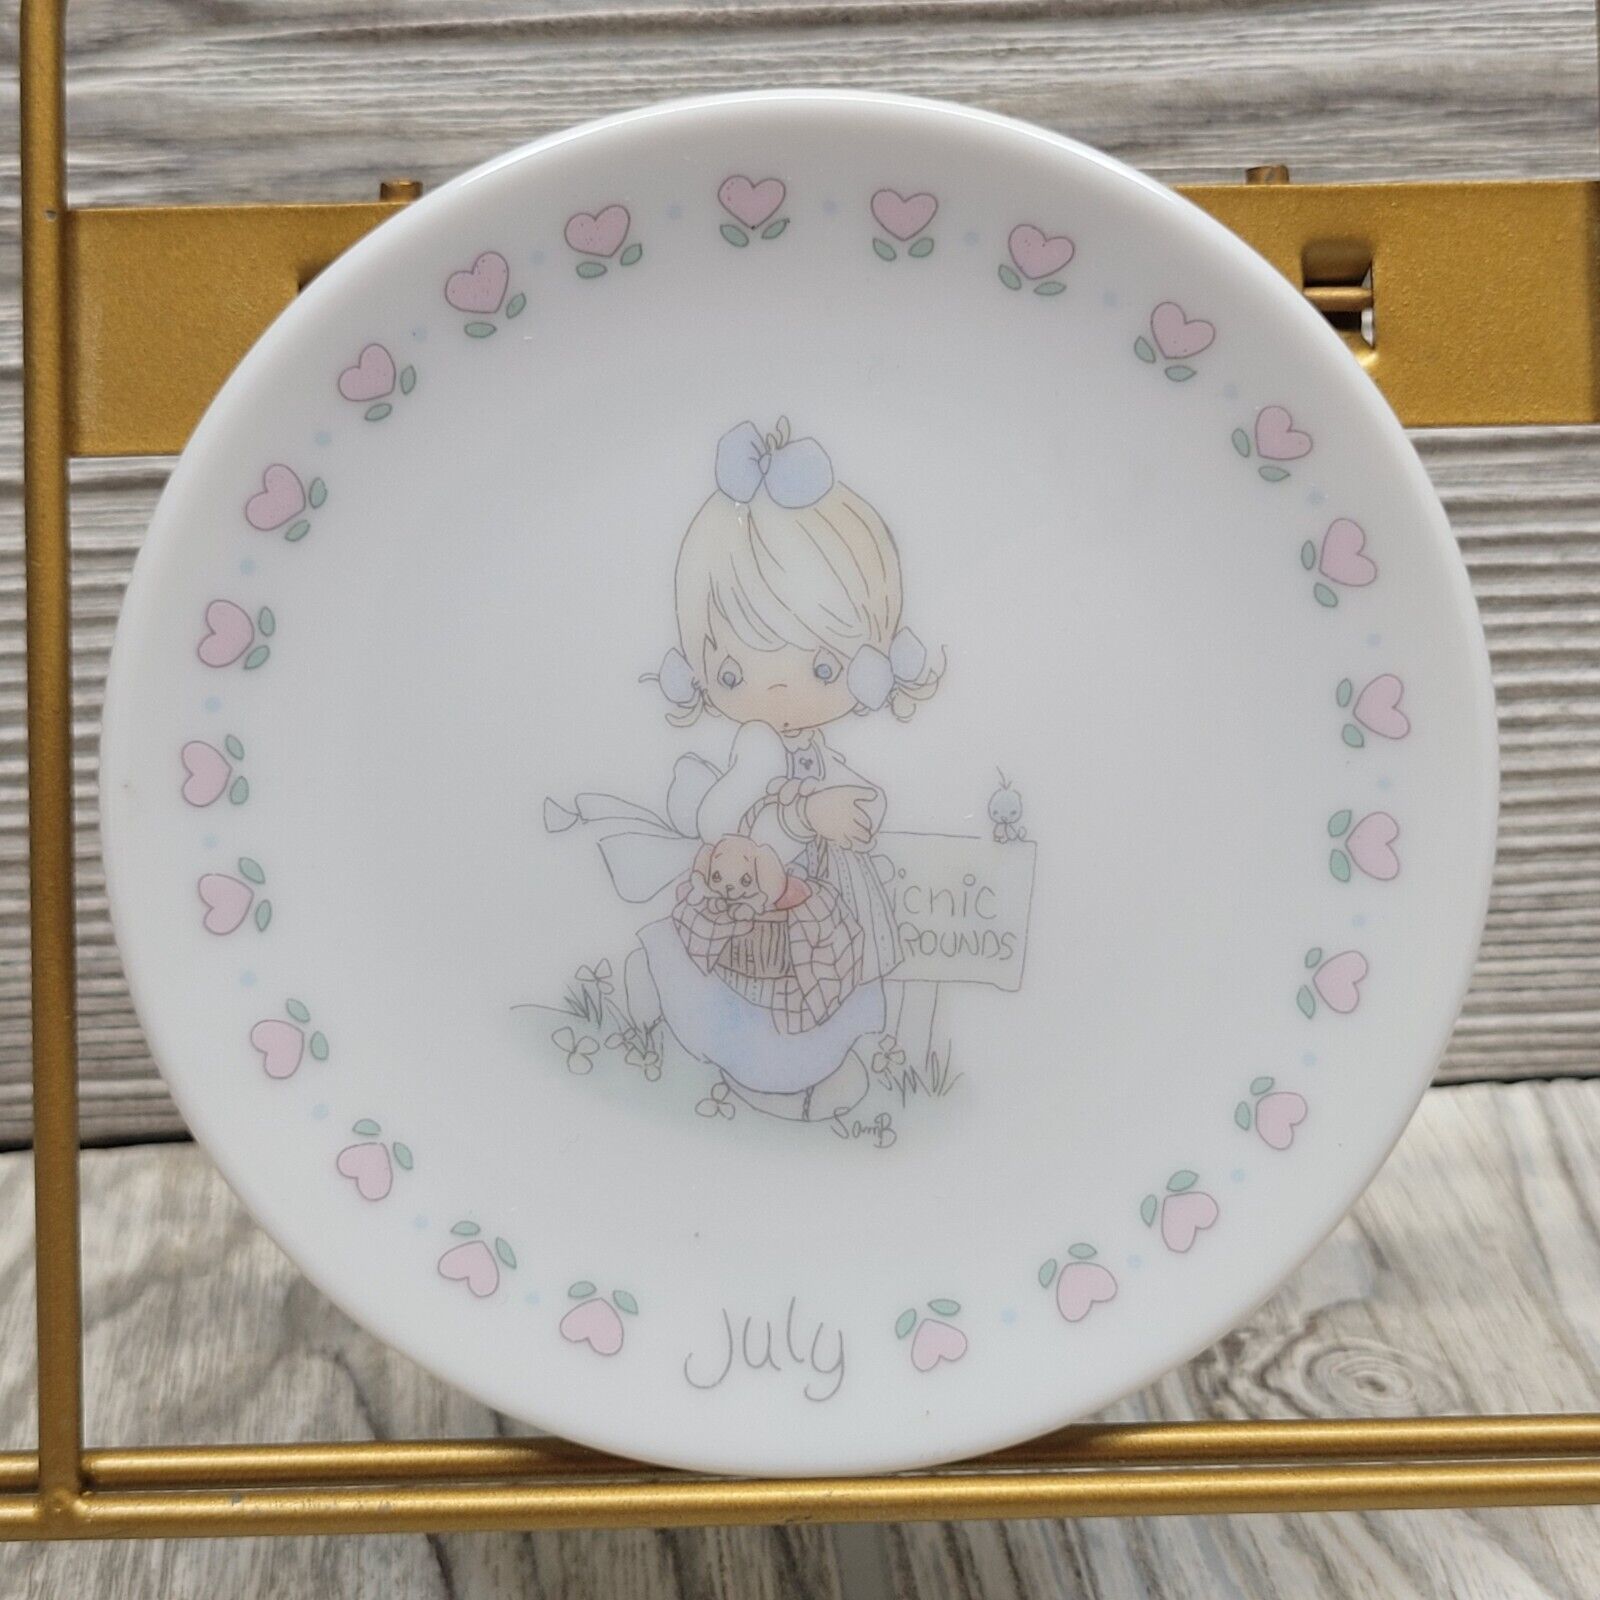 Precious Moments Mini Round Porcelain Plate Birth Month July Birthday Girl Puppy - $9.99